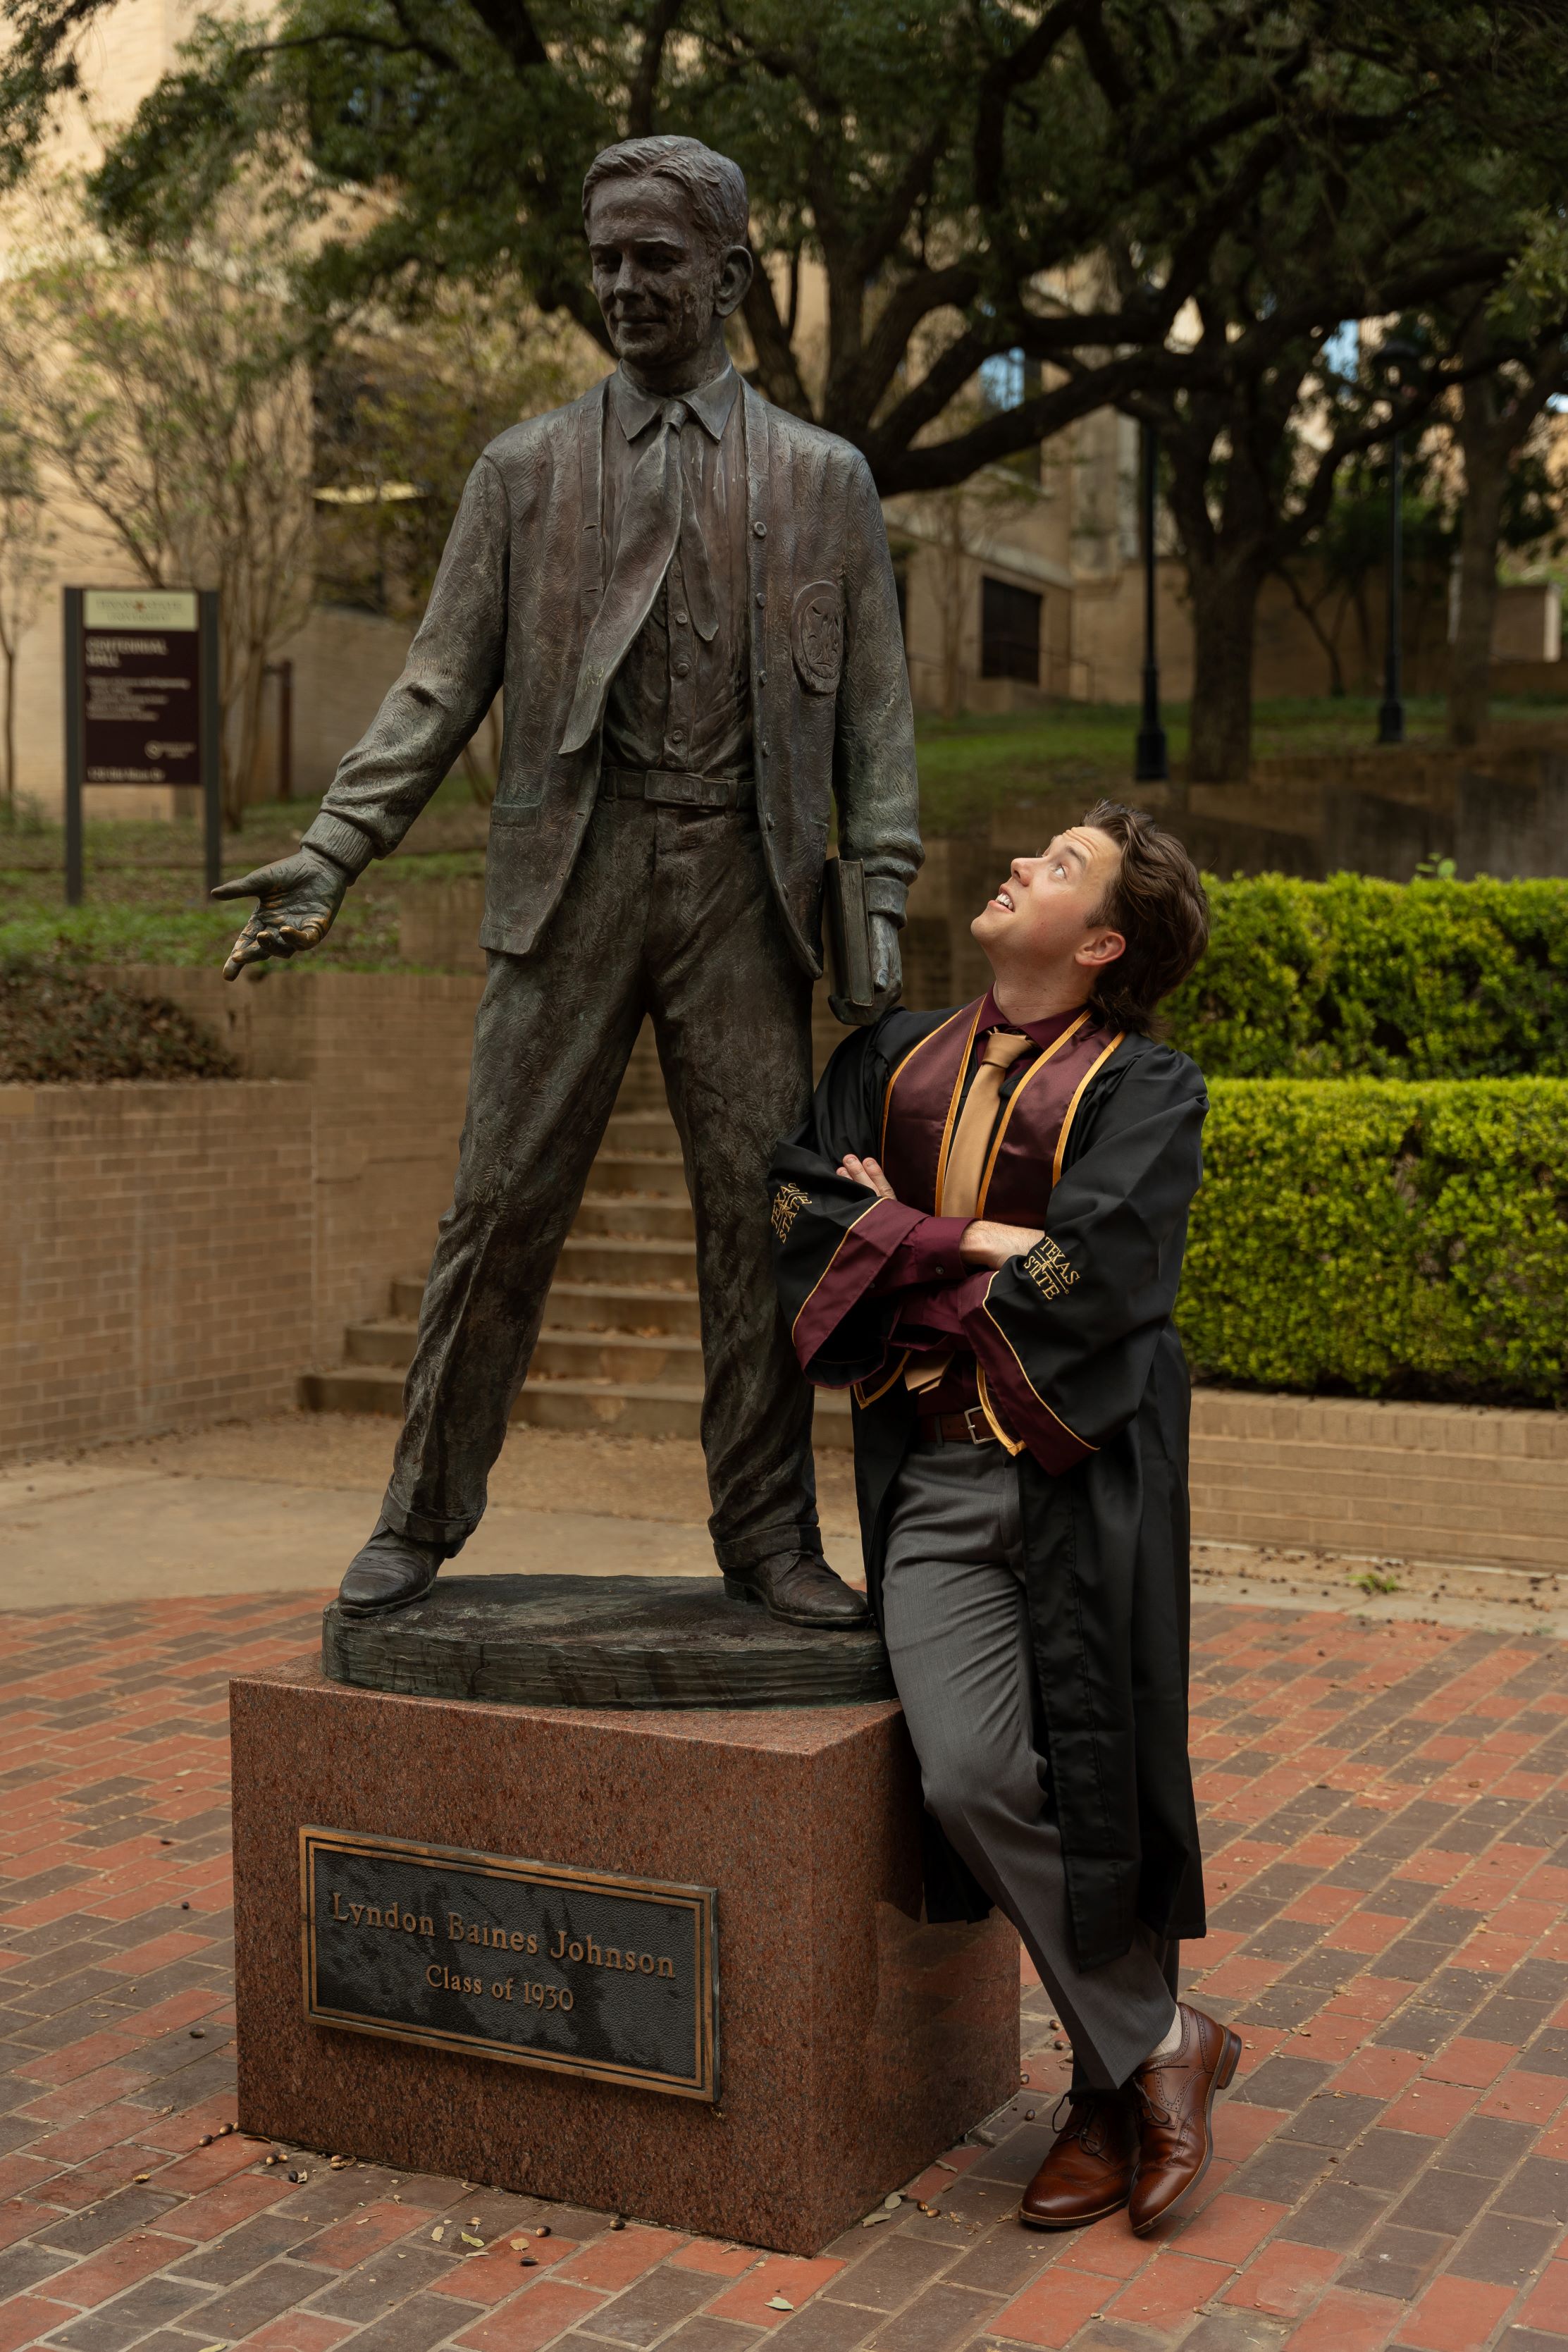 Jack in his graduation gown looking up at a statue of President LBJ